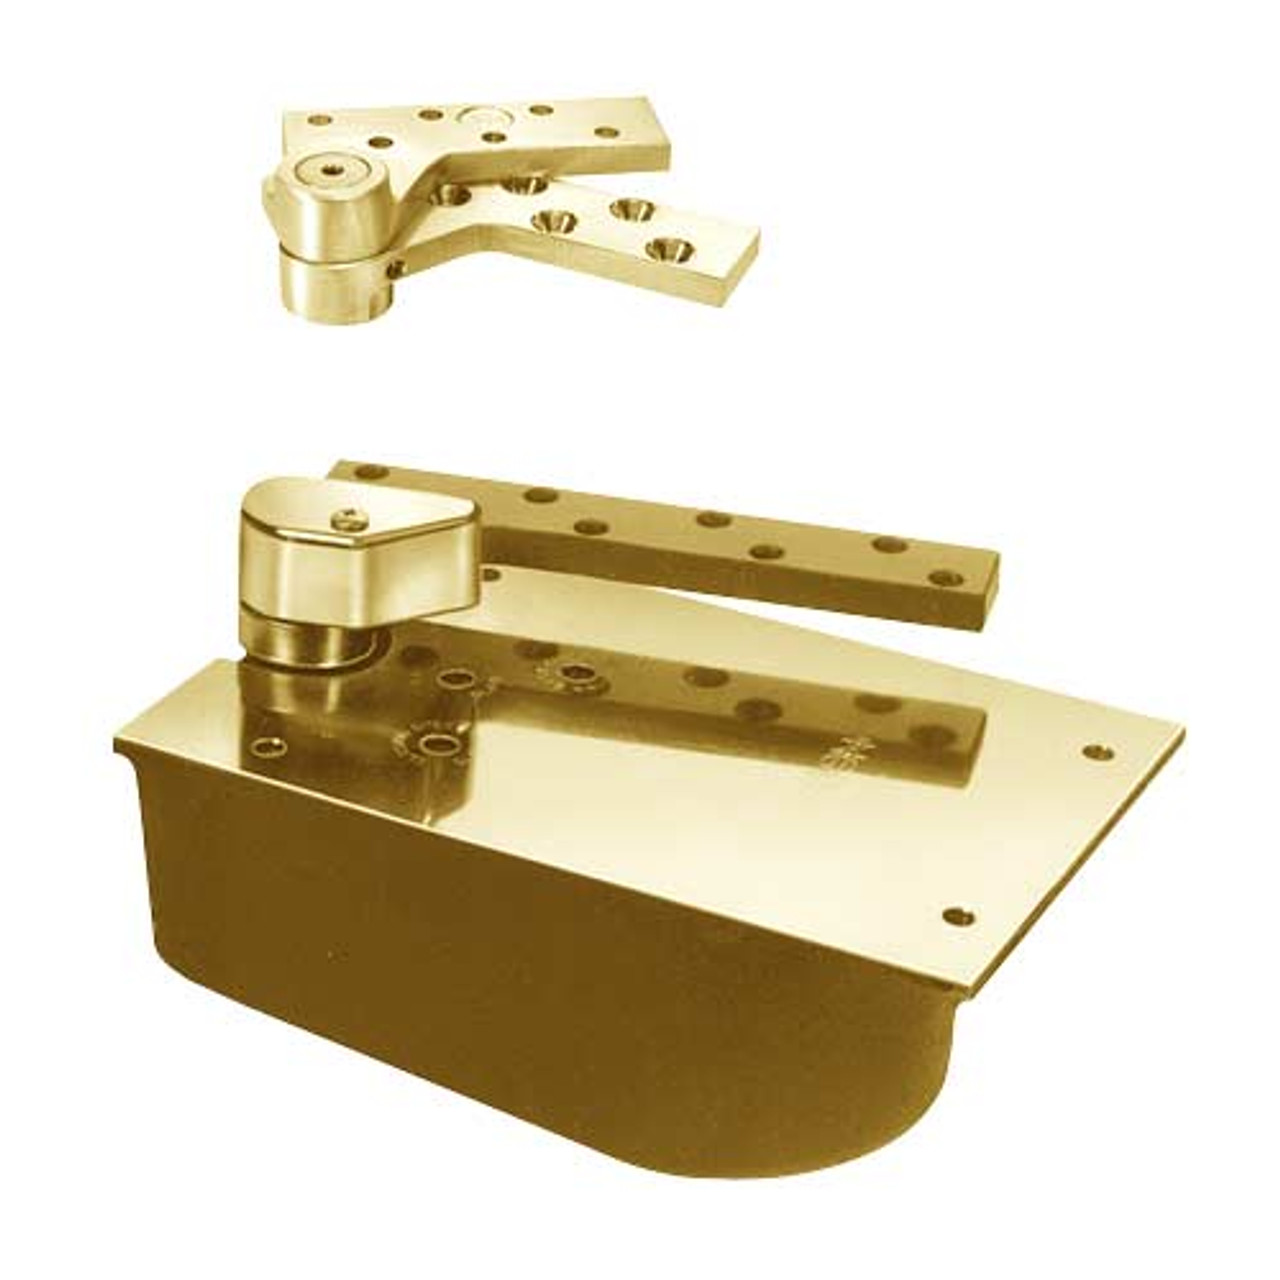 L27-85N-LH-605 Rixson 27 Series Extra Heavy Duty Lead Lined Offset Floor Closer in Bright Brass Finish